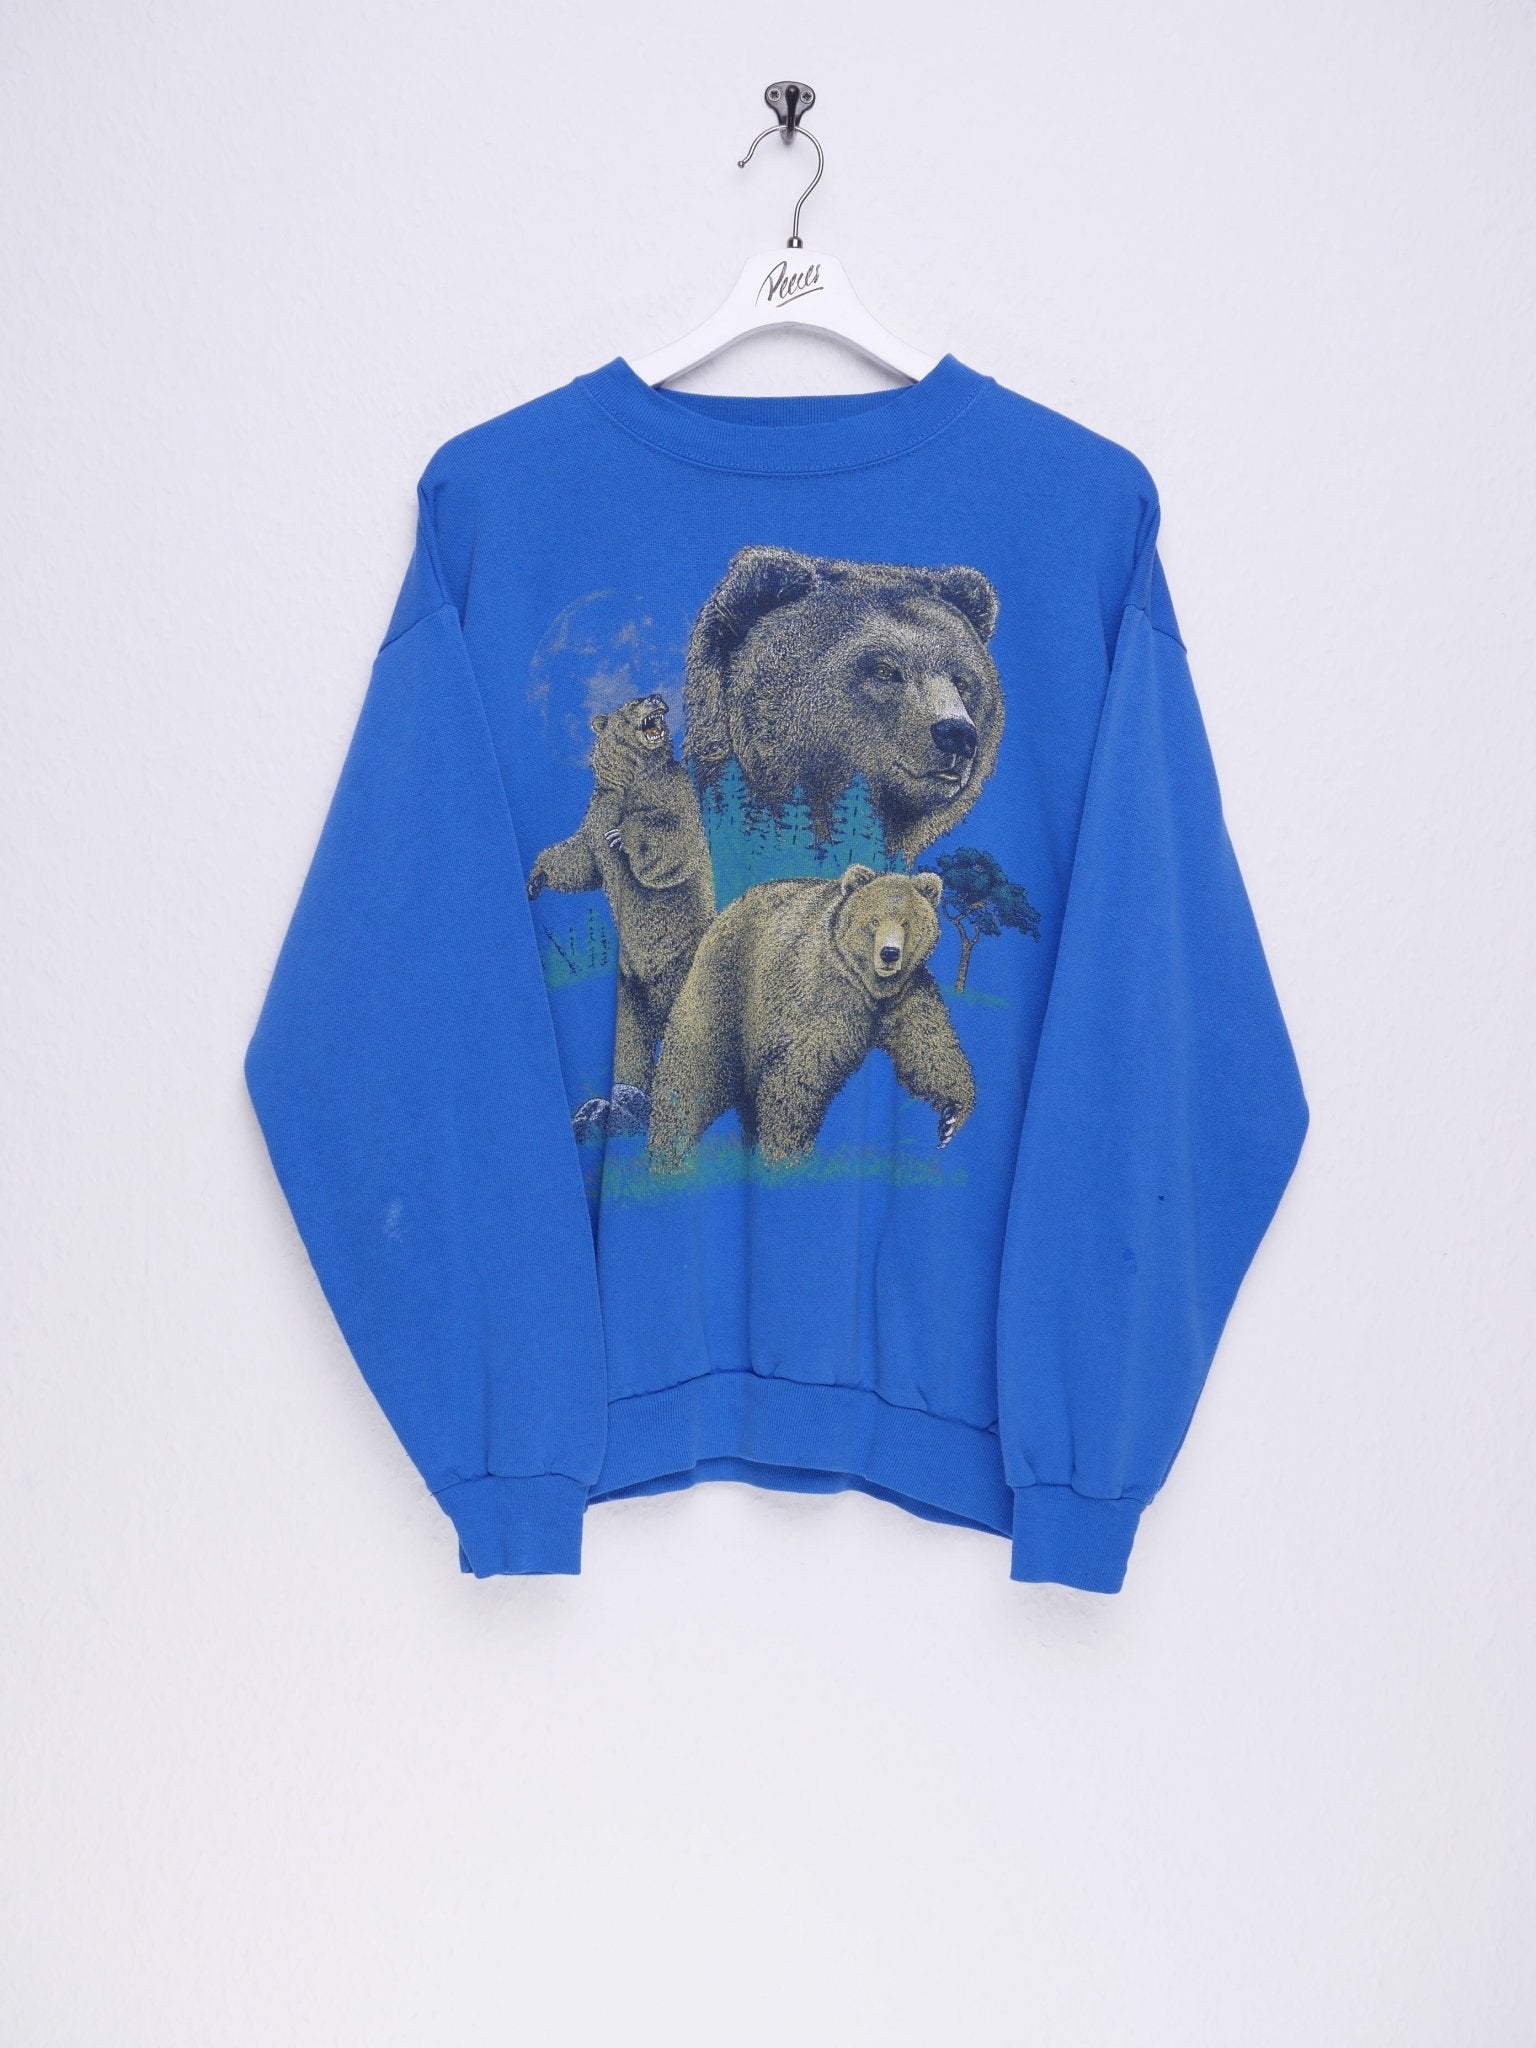 Bear printed Graphic Vintage Sweater - Peeces